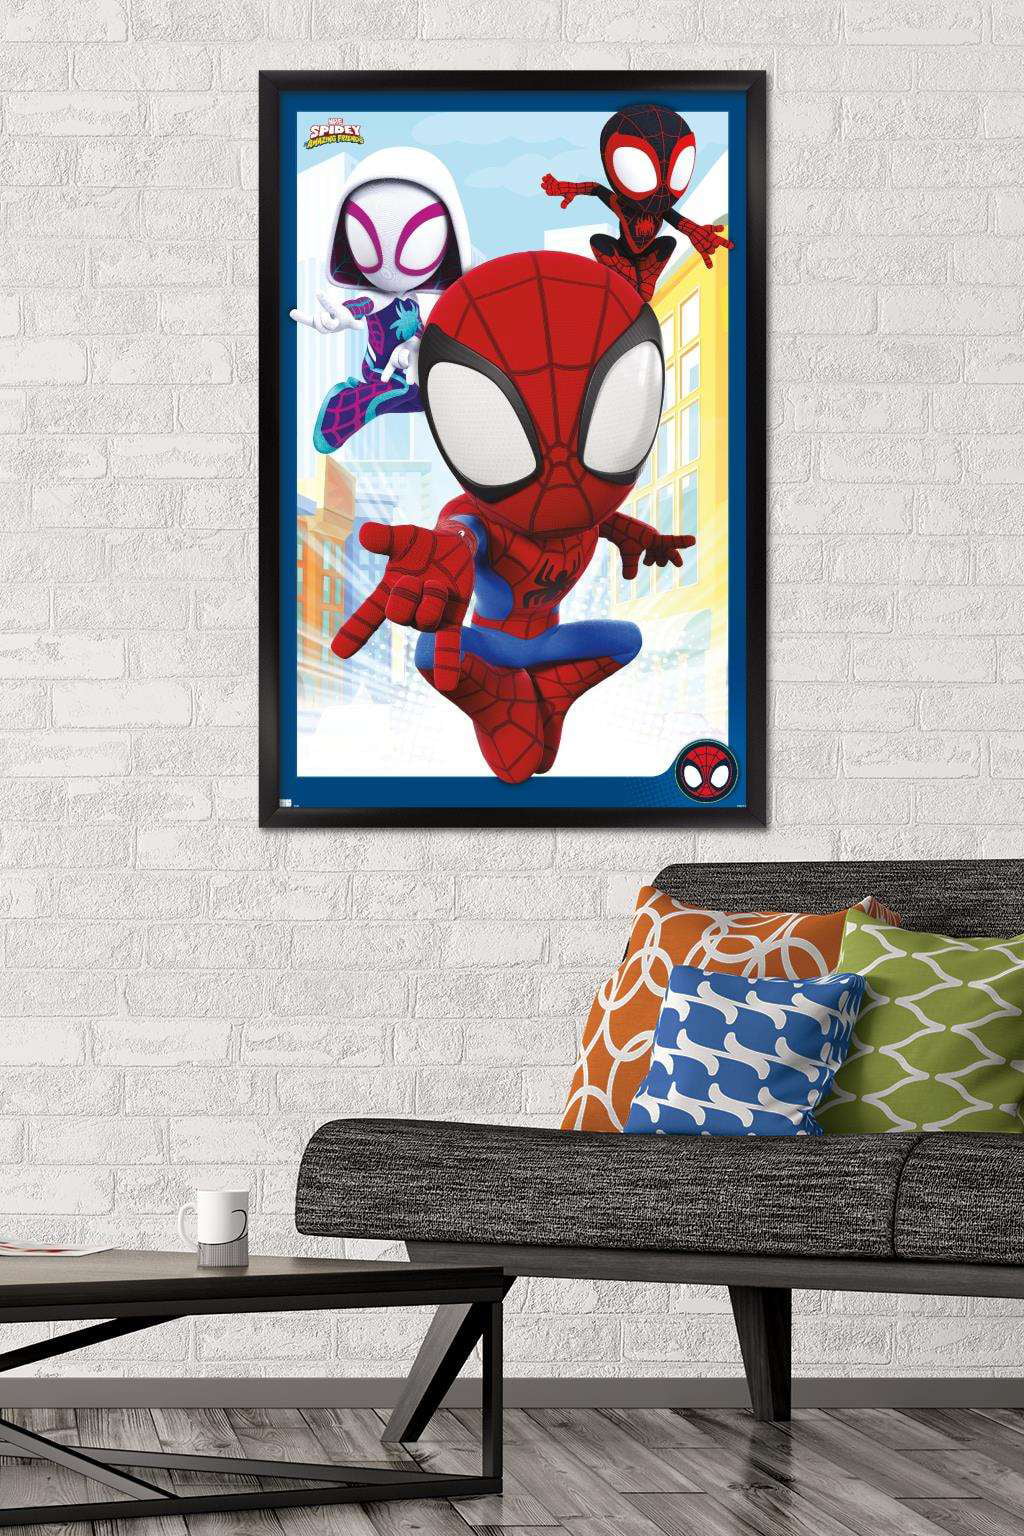 Spidey And His Amazing Friends Canvas Print for Sale by Vegas